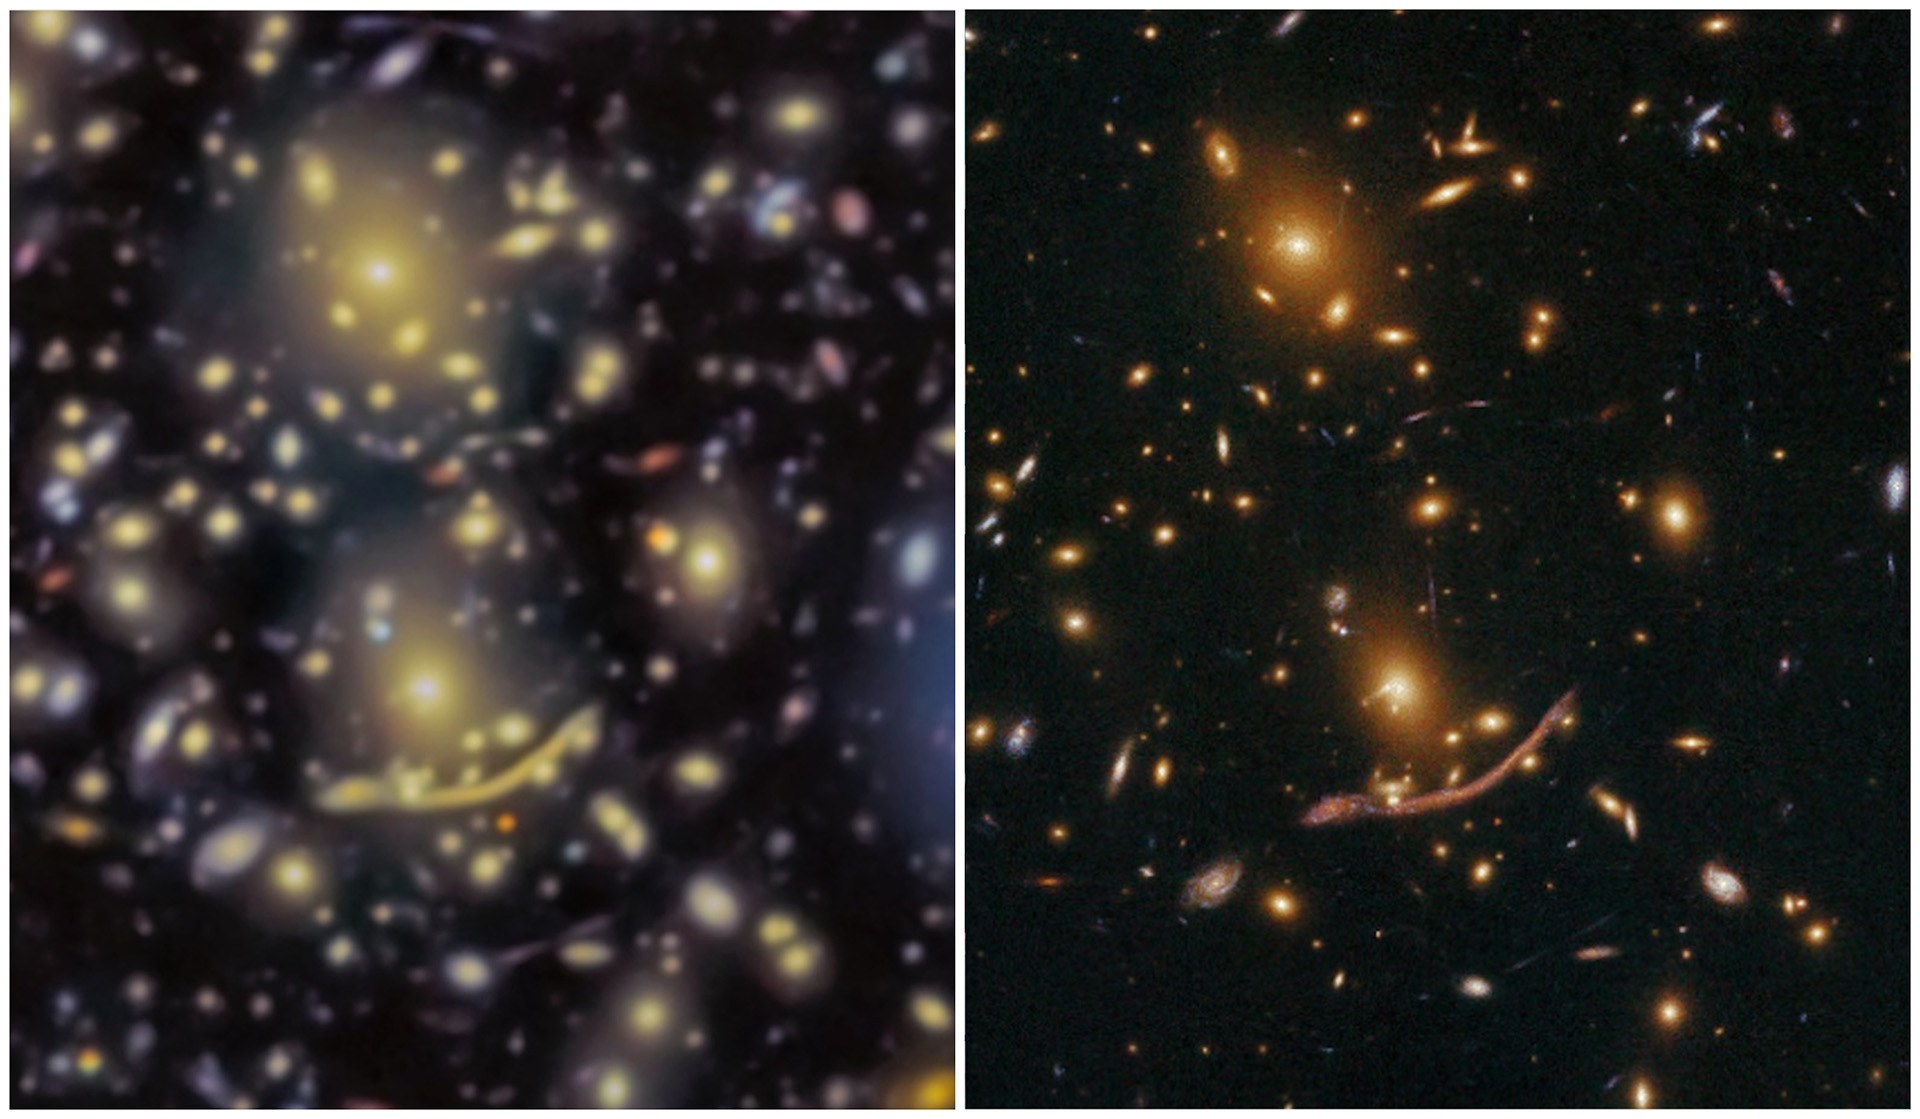 This image compares the centre of the cluster as seen with the GTC (left) and with the Hubble Space Telescope (right). The data from the HST have better spatial resolution because they are not affected by the turbulence in the atmosphere. The data from the GTC are even deeper, showing the existence of some galaxies previously unknown and not detected by the HST. Credit: GRANTECAN/HST.